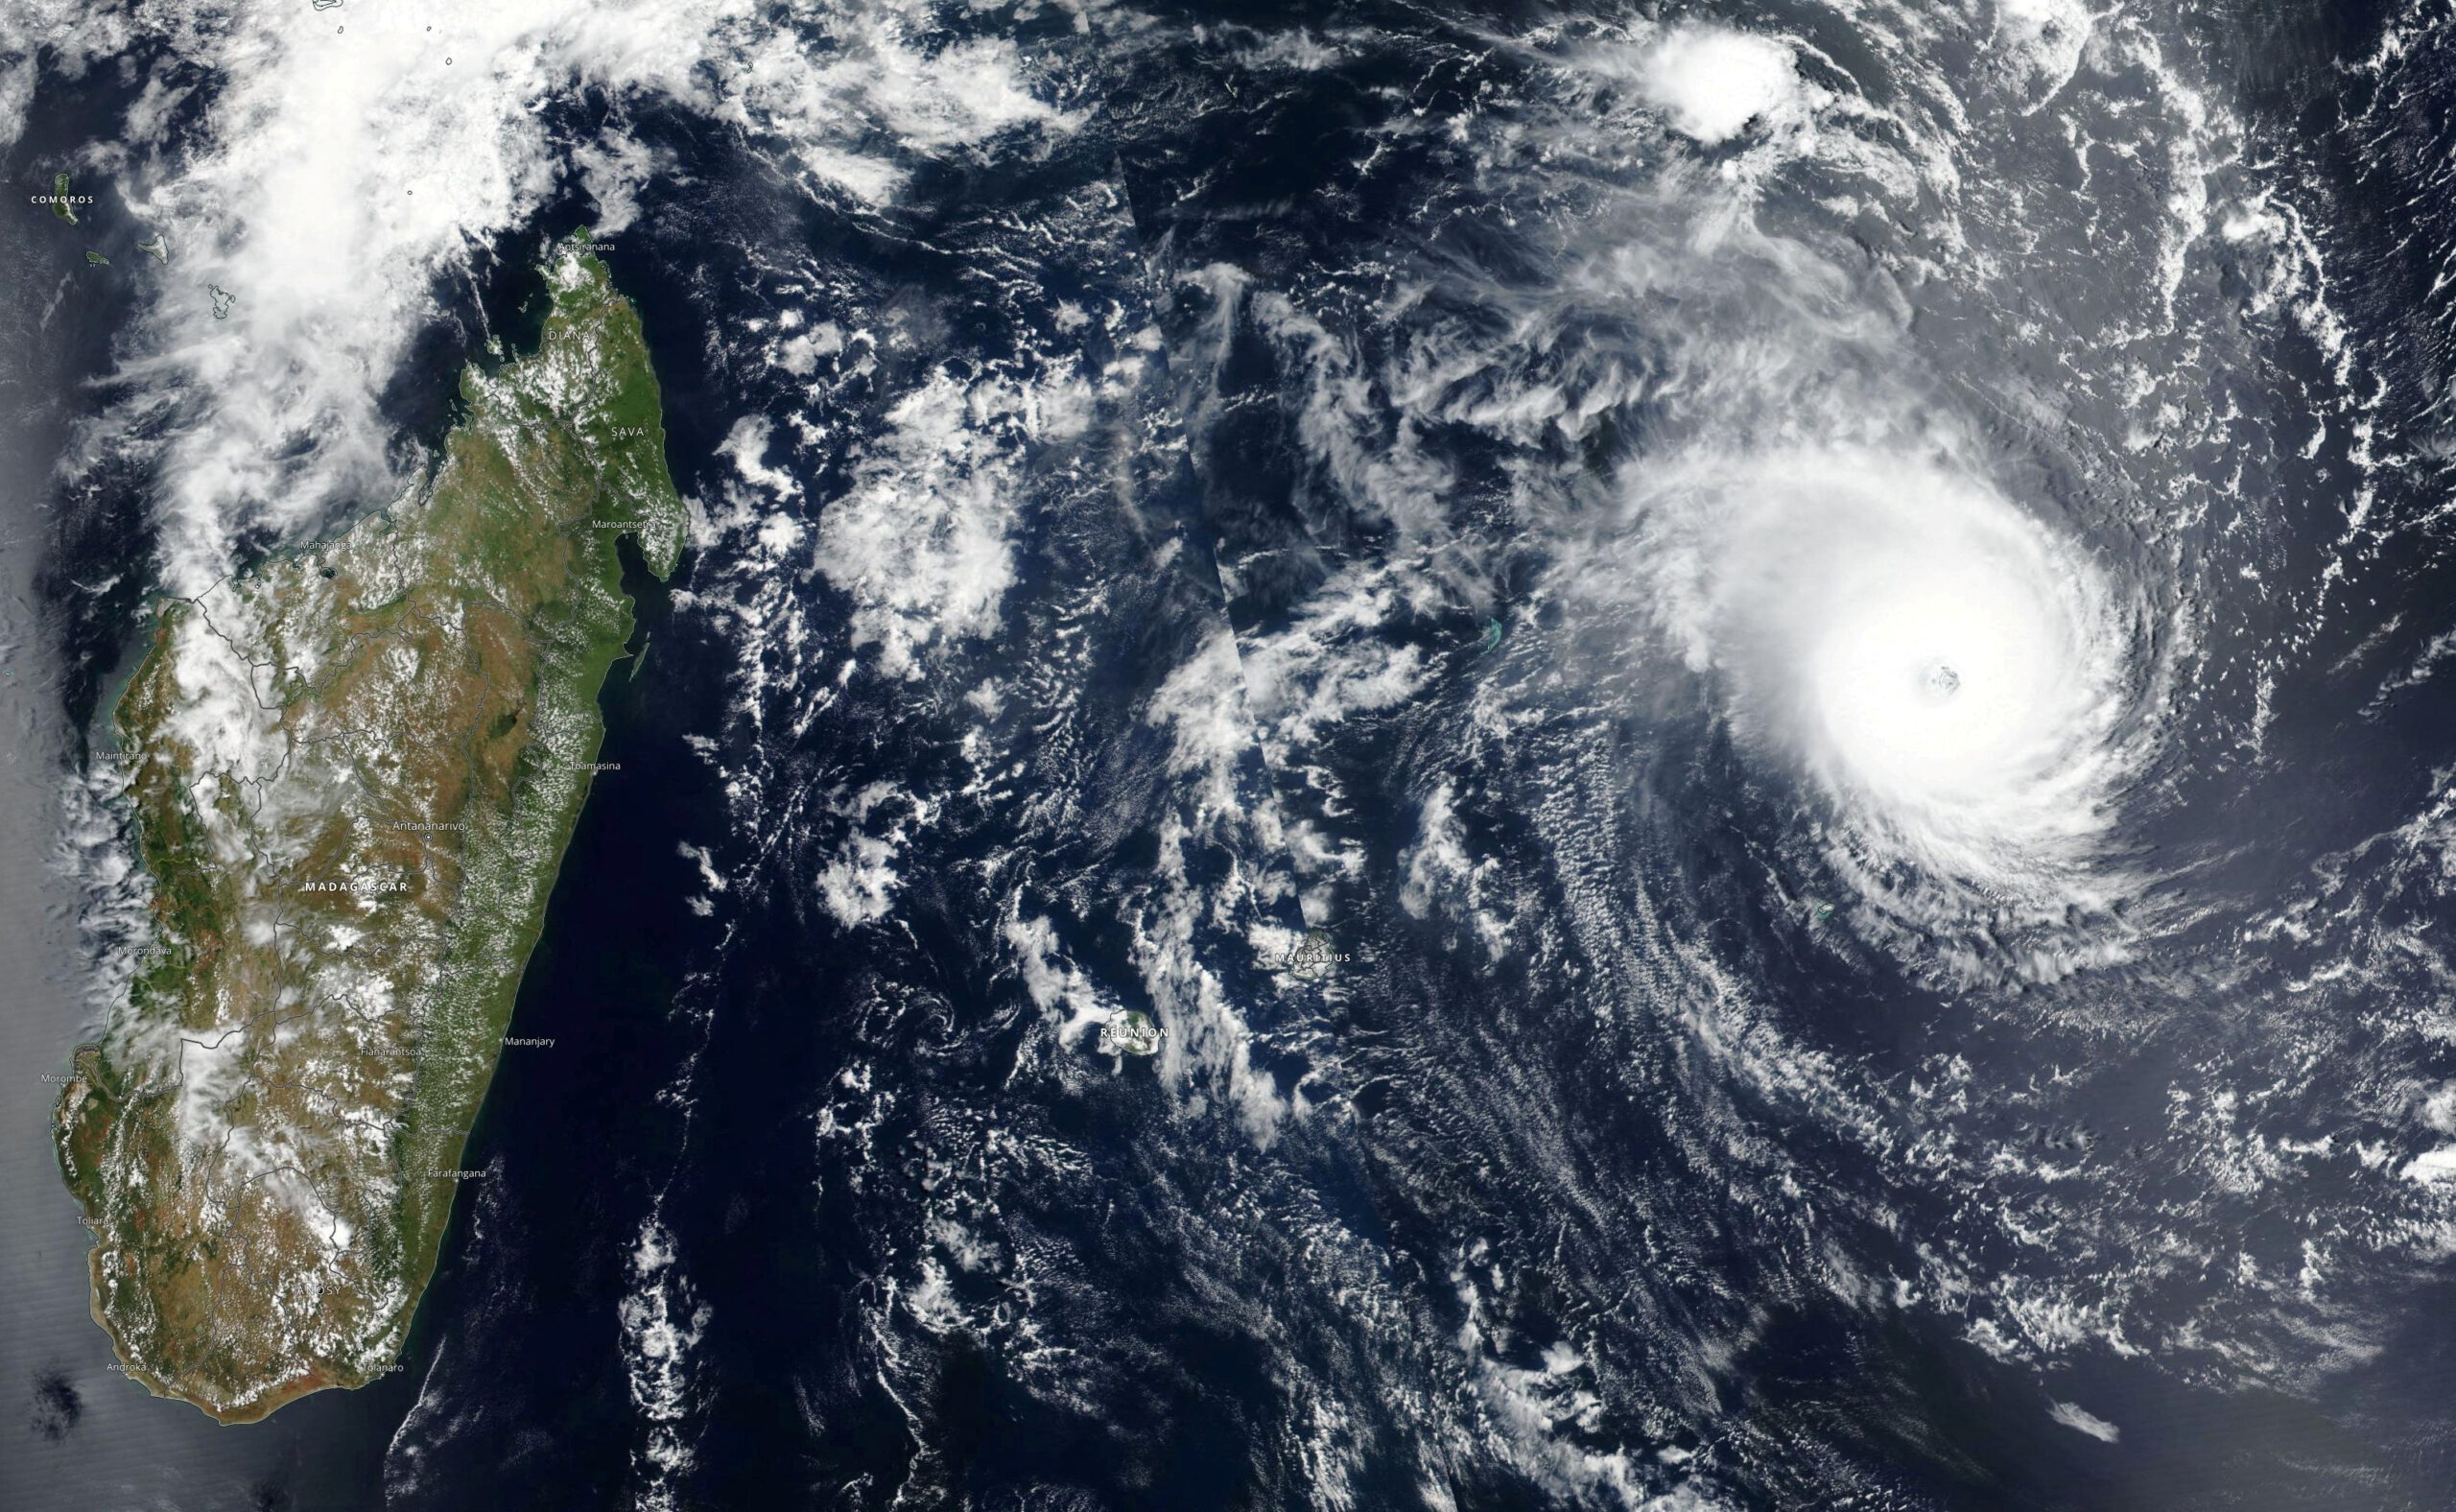 Weather tracker: Cyclone Freddy brings torrential rain to parts of